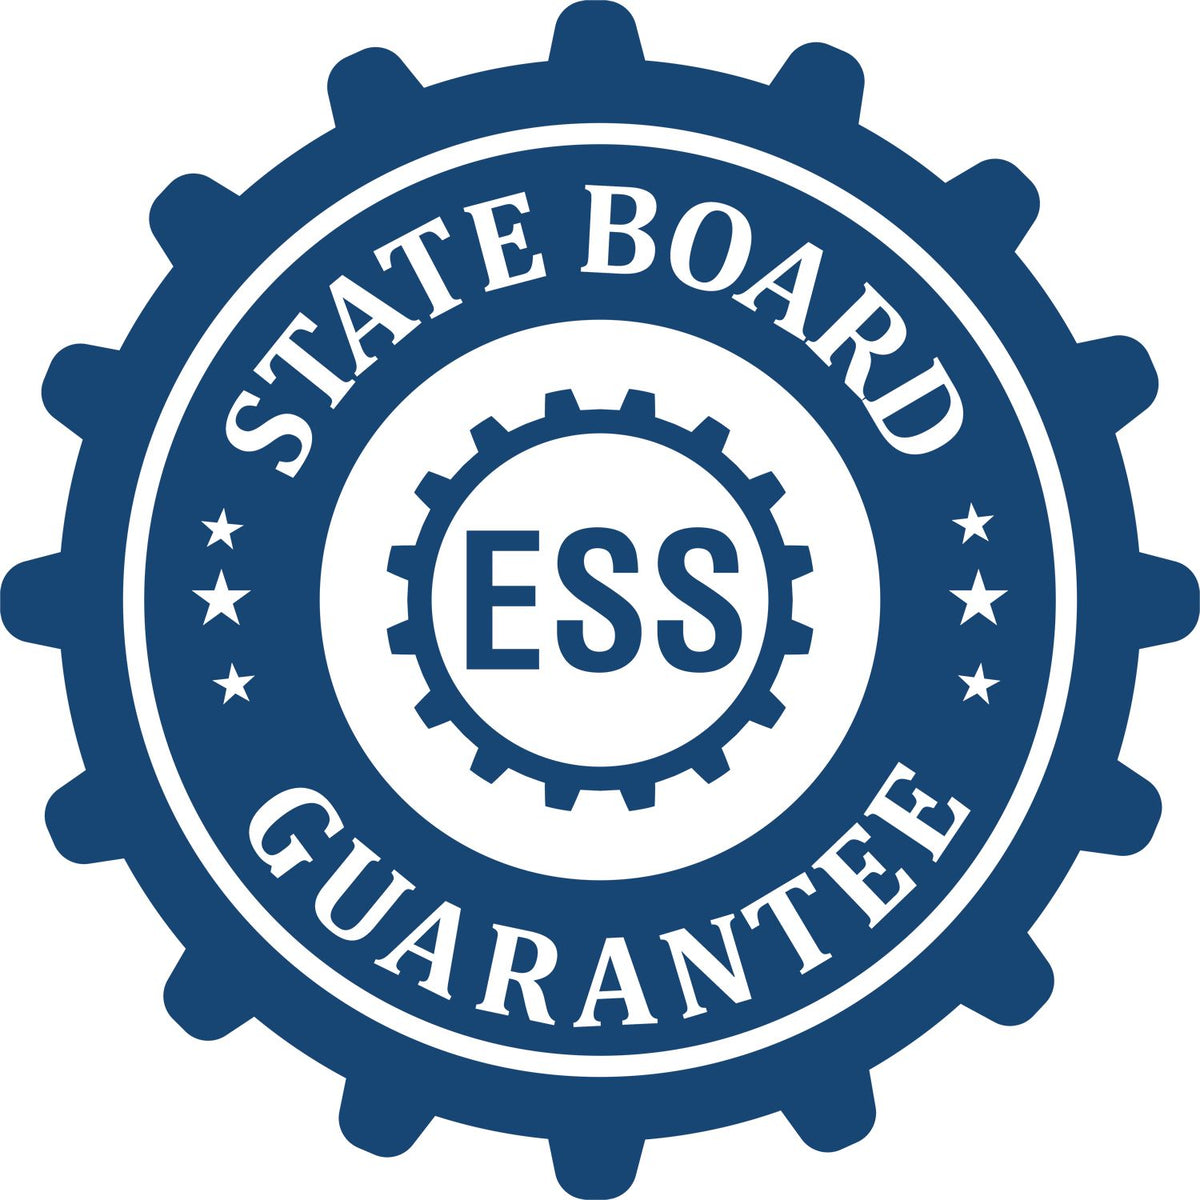 An emblem in a gear shape illustrating a state board guarantee for the State of New Mexico Long Reach Architectural Embossing Seal product.